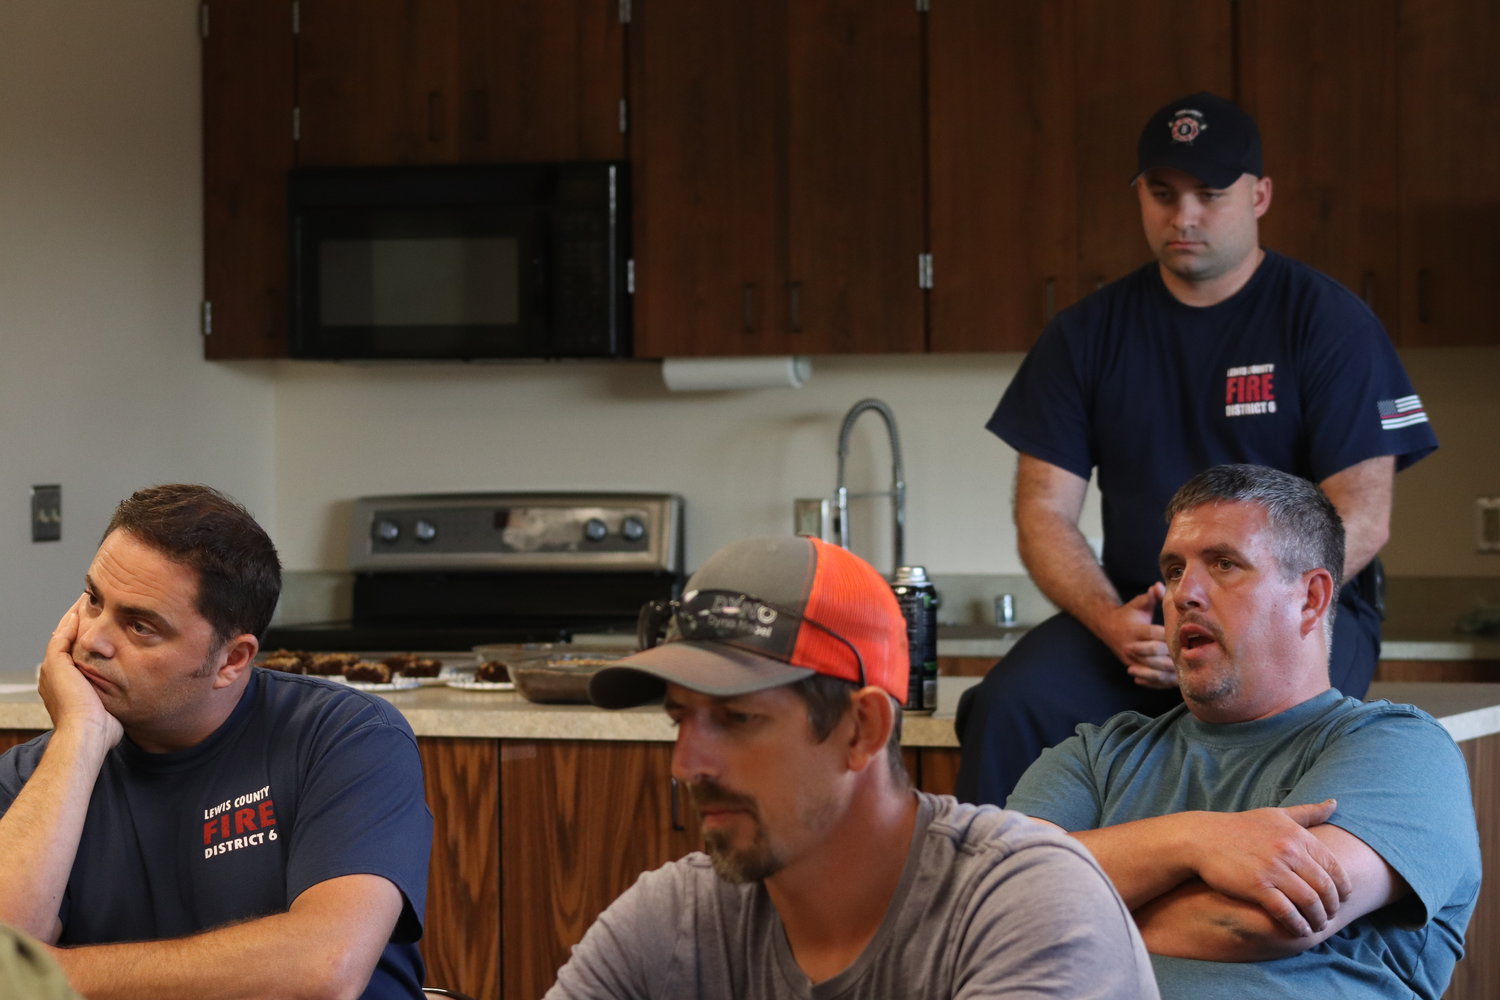 Firefighters sit among Adna community members at a Lewis County Fire District 6 board of commissioners meeting on July 27.